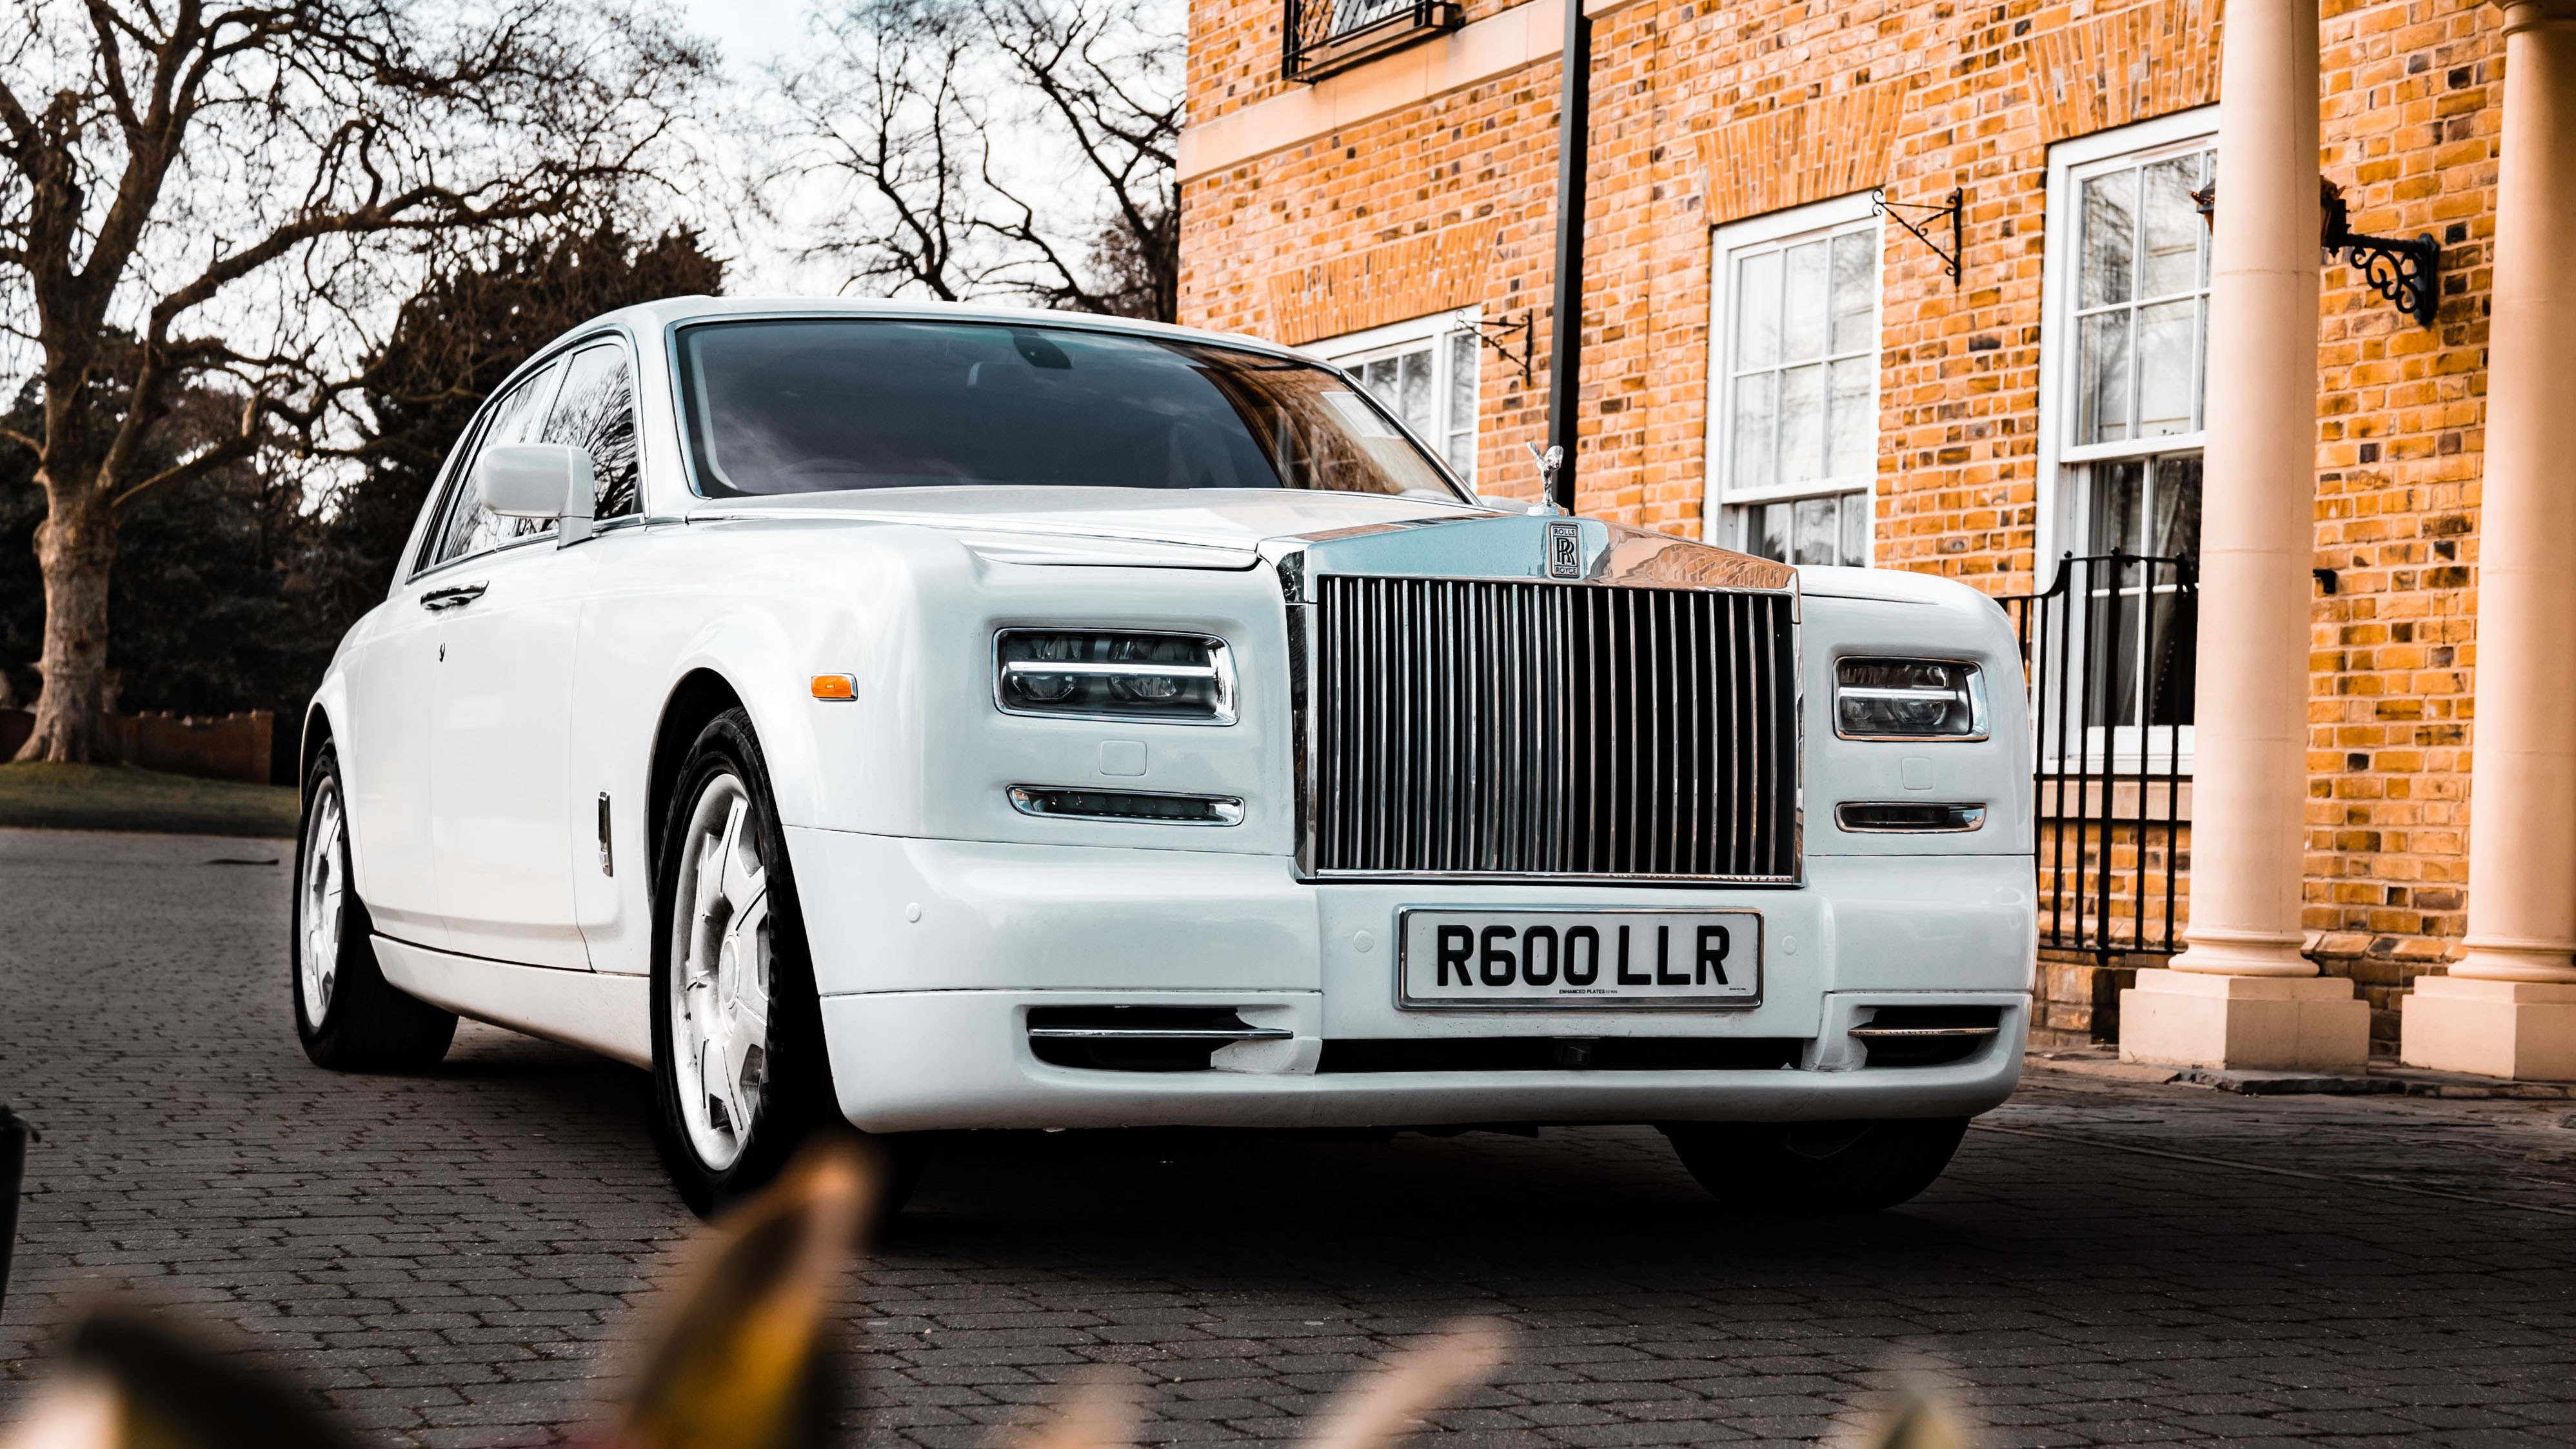 Modern white Rolls-Royce Phantom with its large chrome alloy wheels and iconic chrome front grill in attendance at a popular wedding venue in Southend-on-Sea in Essex.